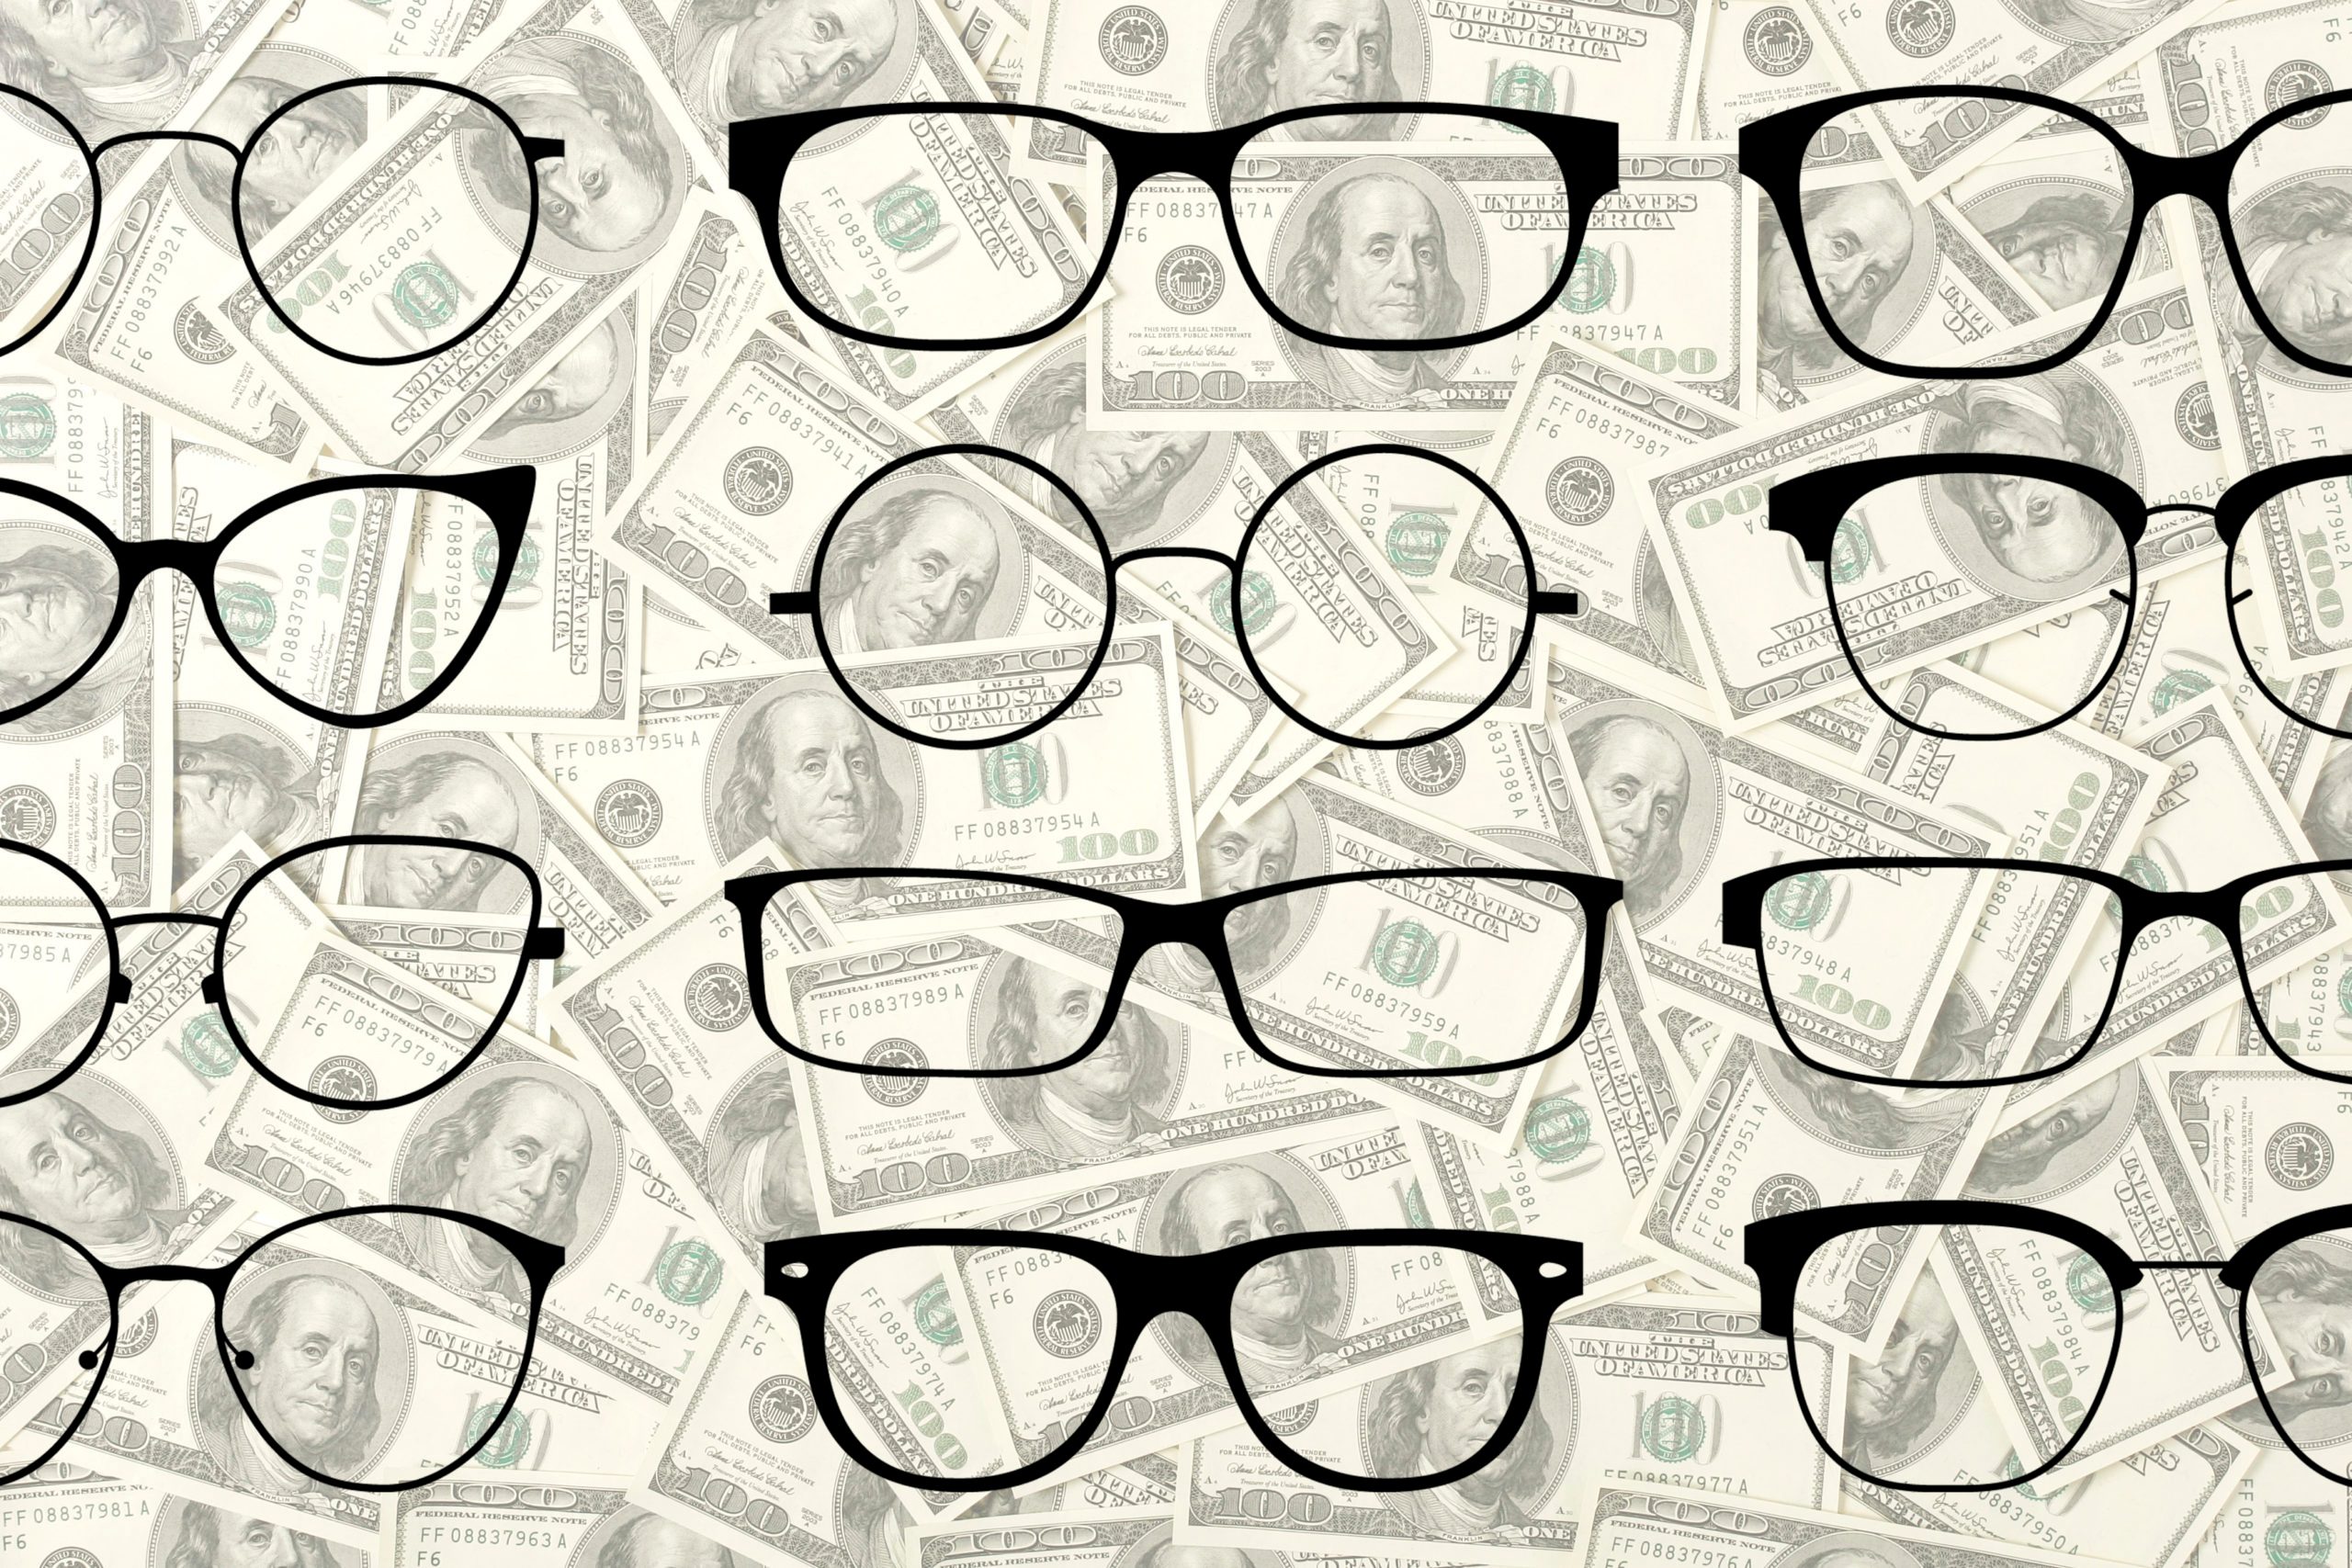 Shop Glasses With Your FSA & HSA Dollars